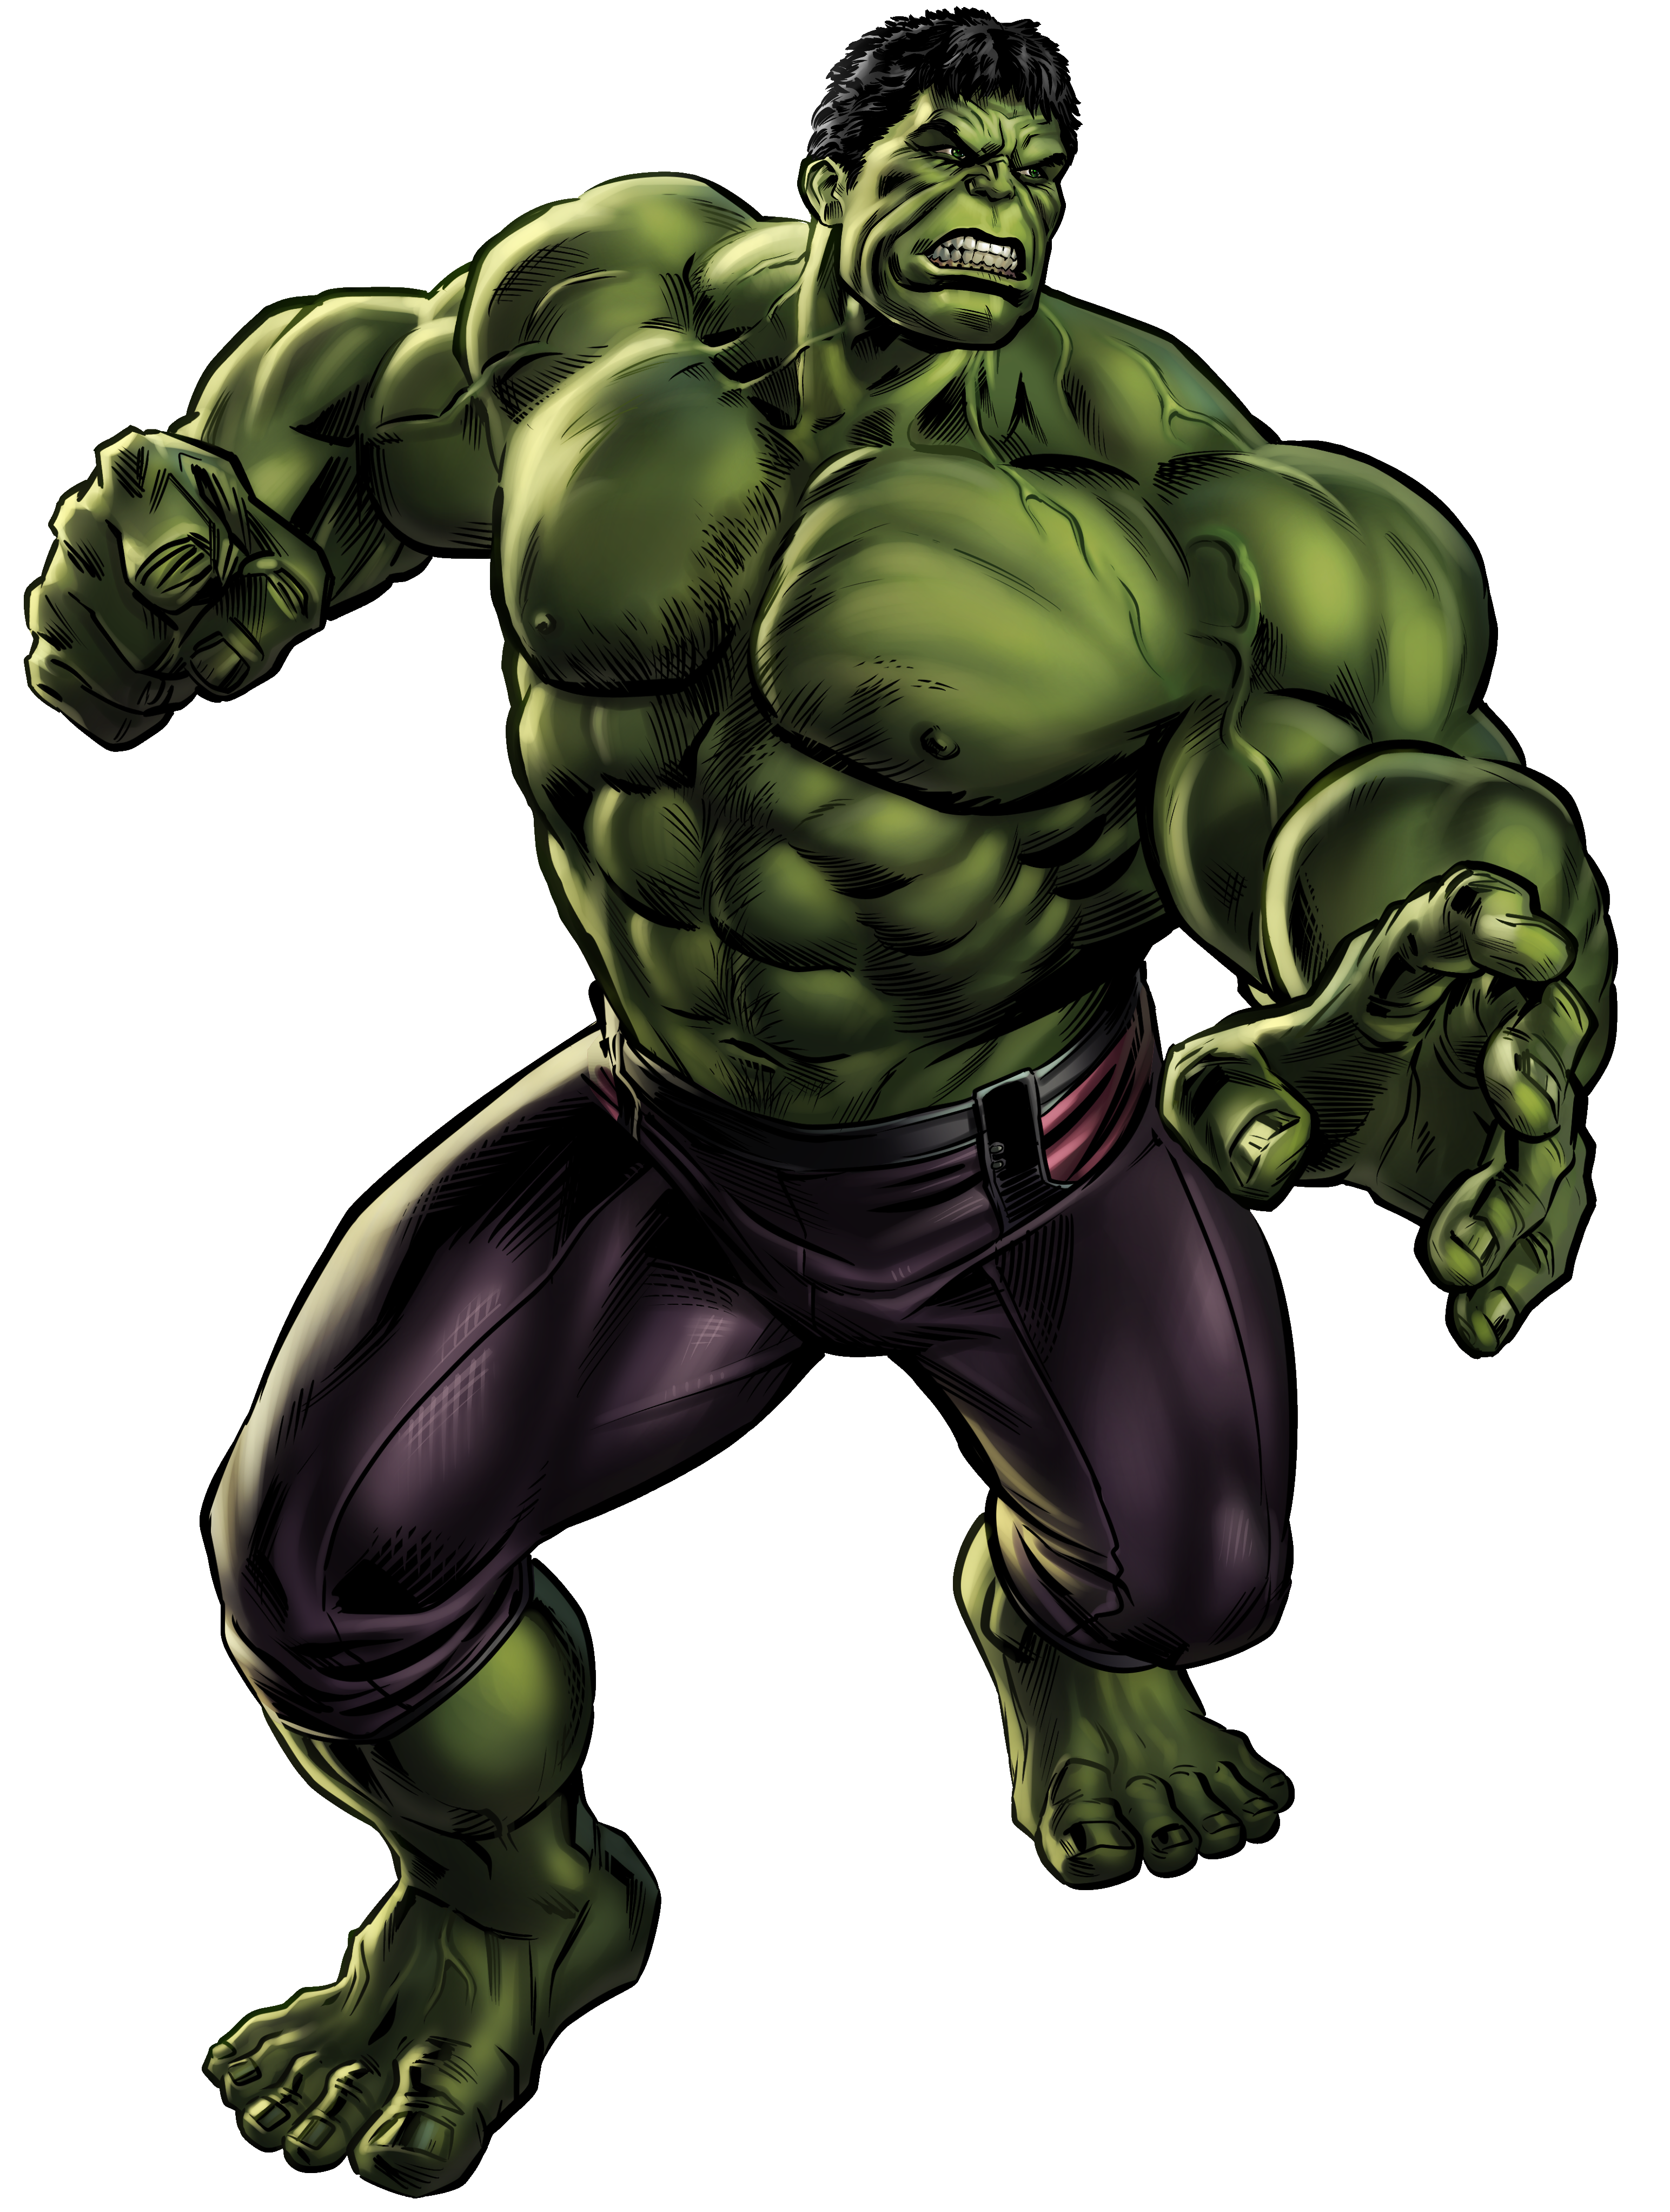 Hulk Alliance Character Fictional Ultimate Muscle Avengers PNG Image